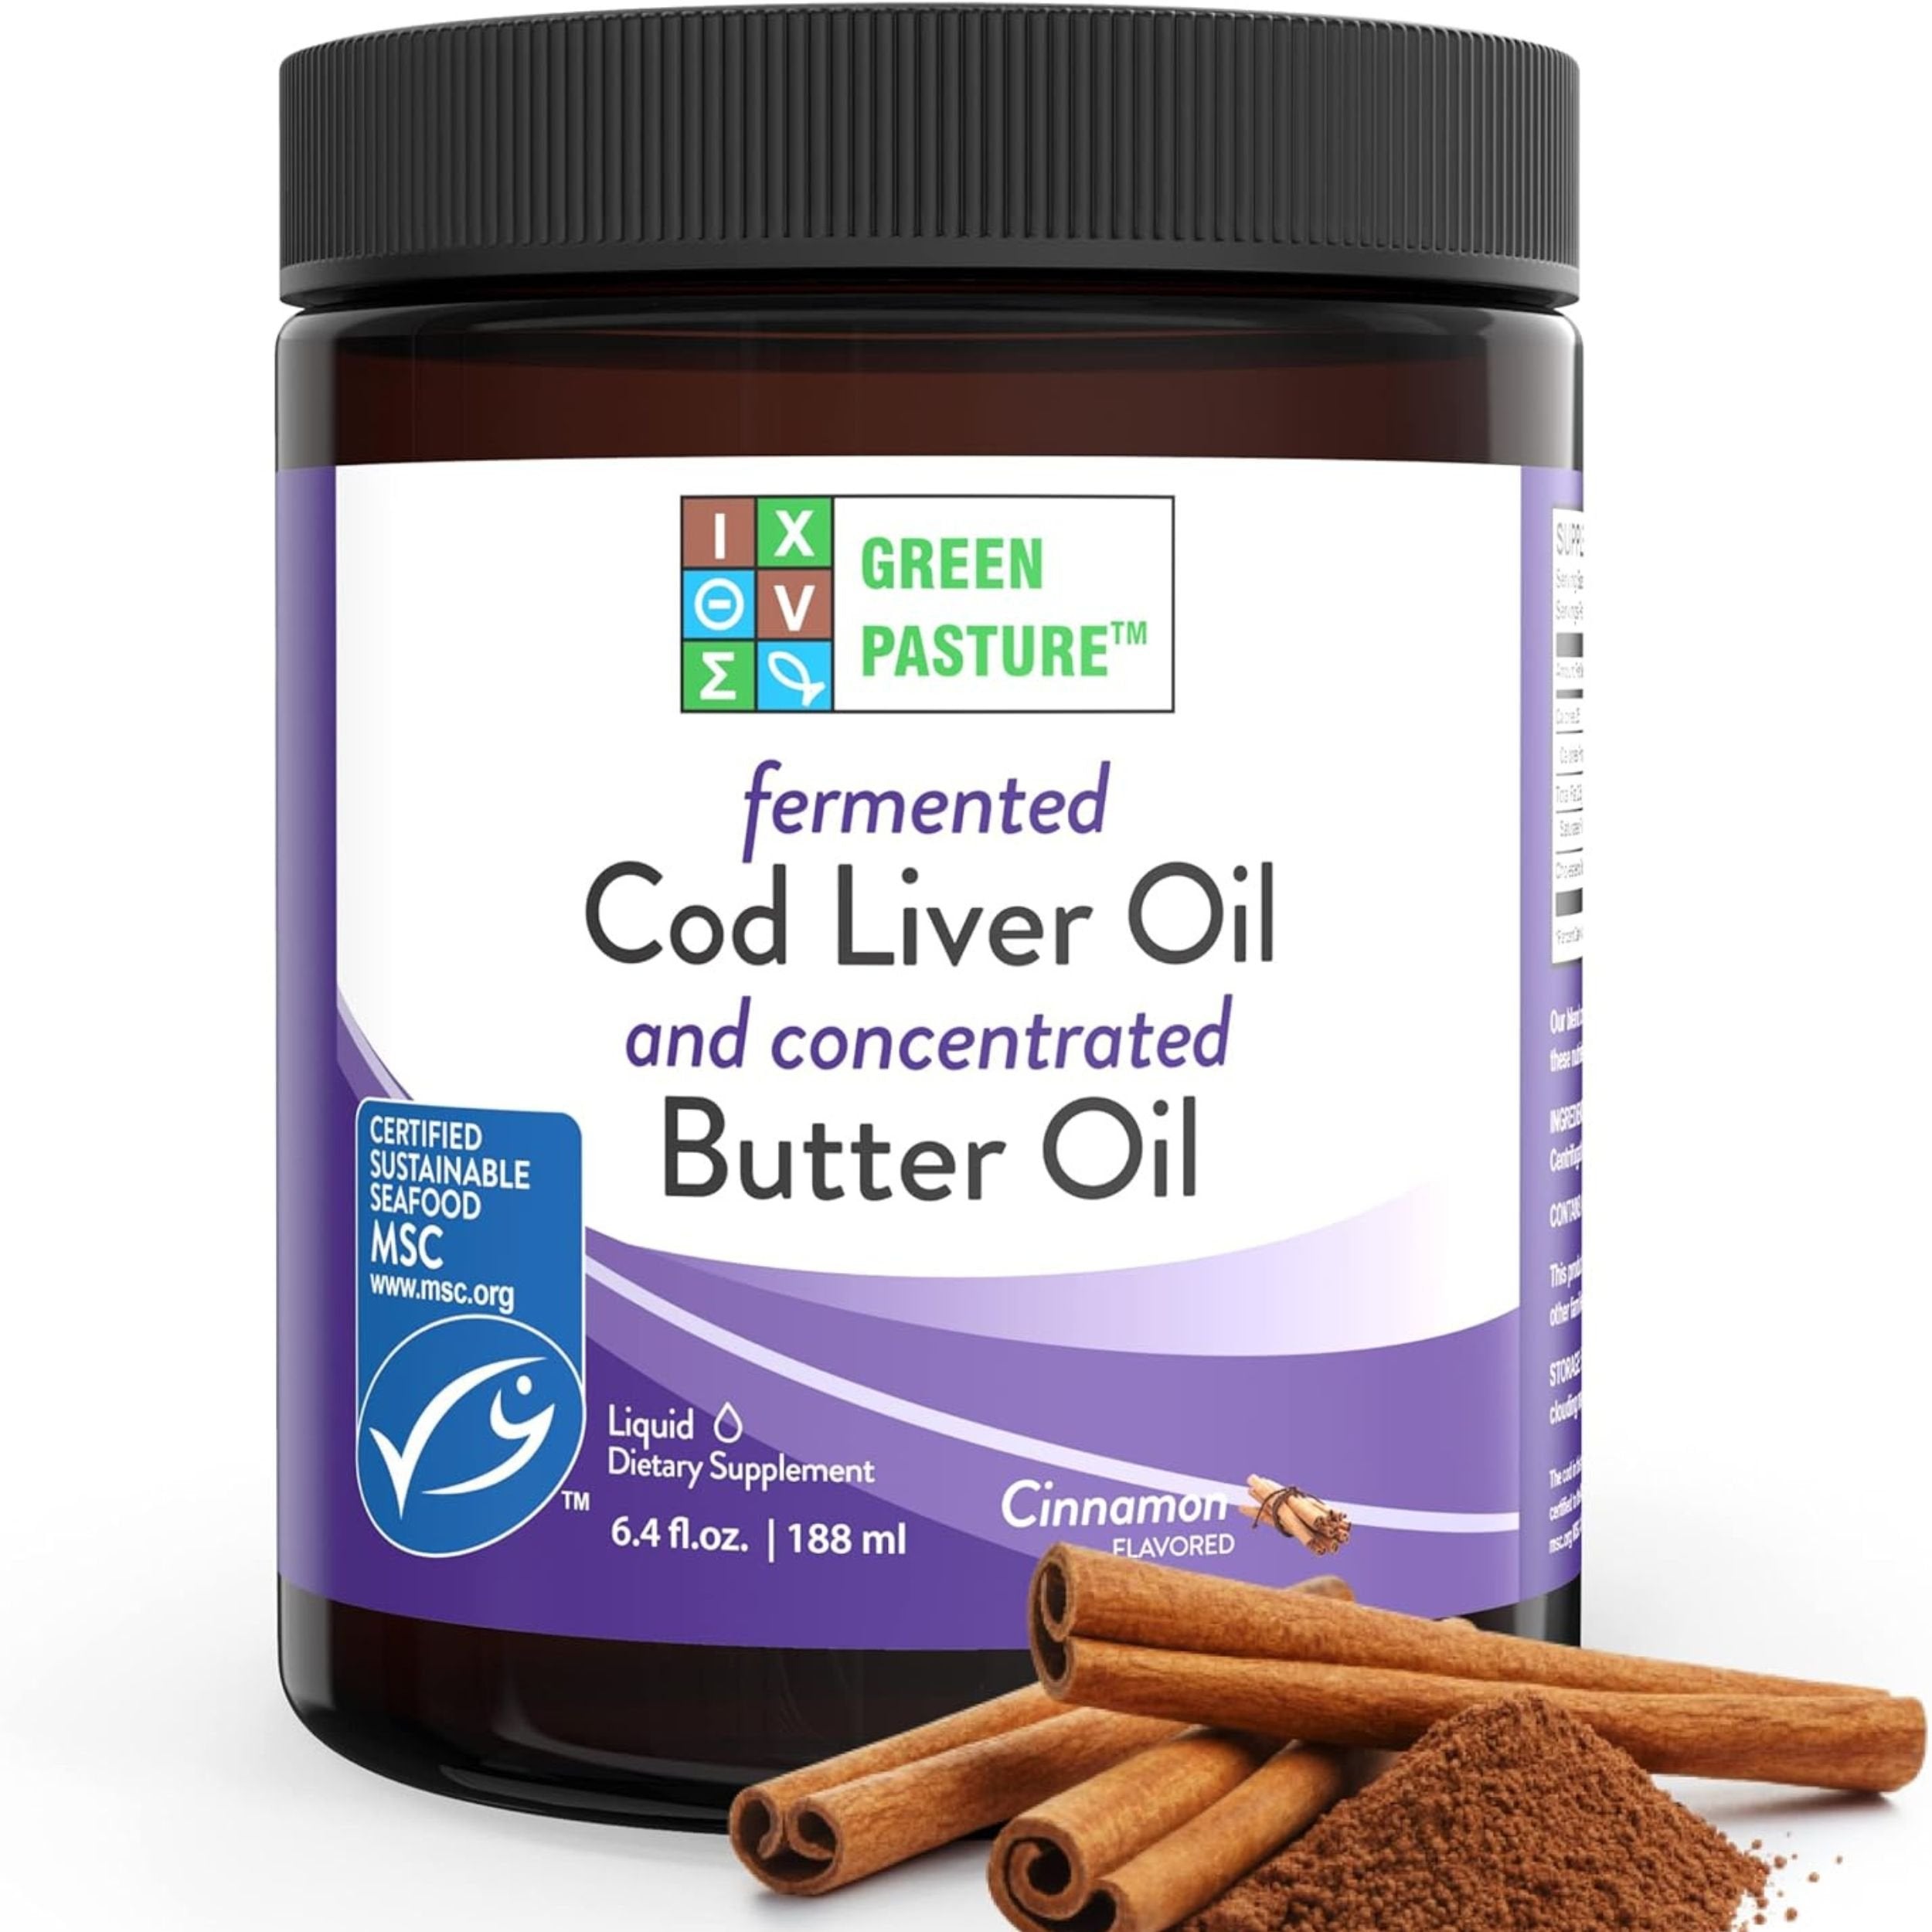 Green Pasture Fermented Cod Liver Oil and Concentrated Butter Oil - Cinnamon- Omega Fatty Acids - MSC Certified - Vitamins A & D